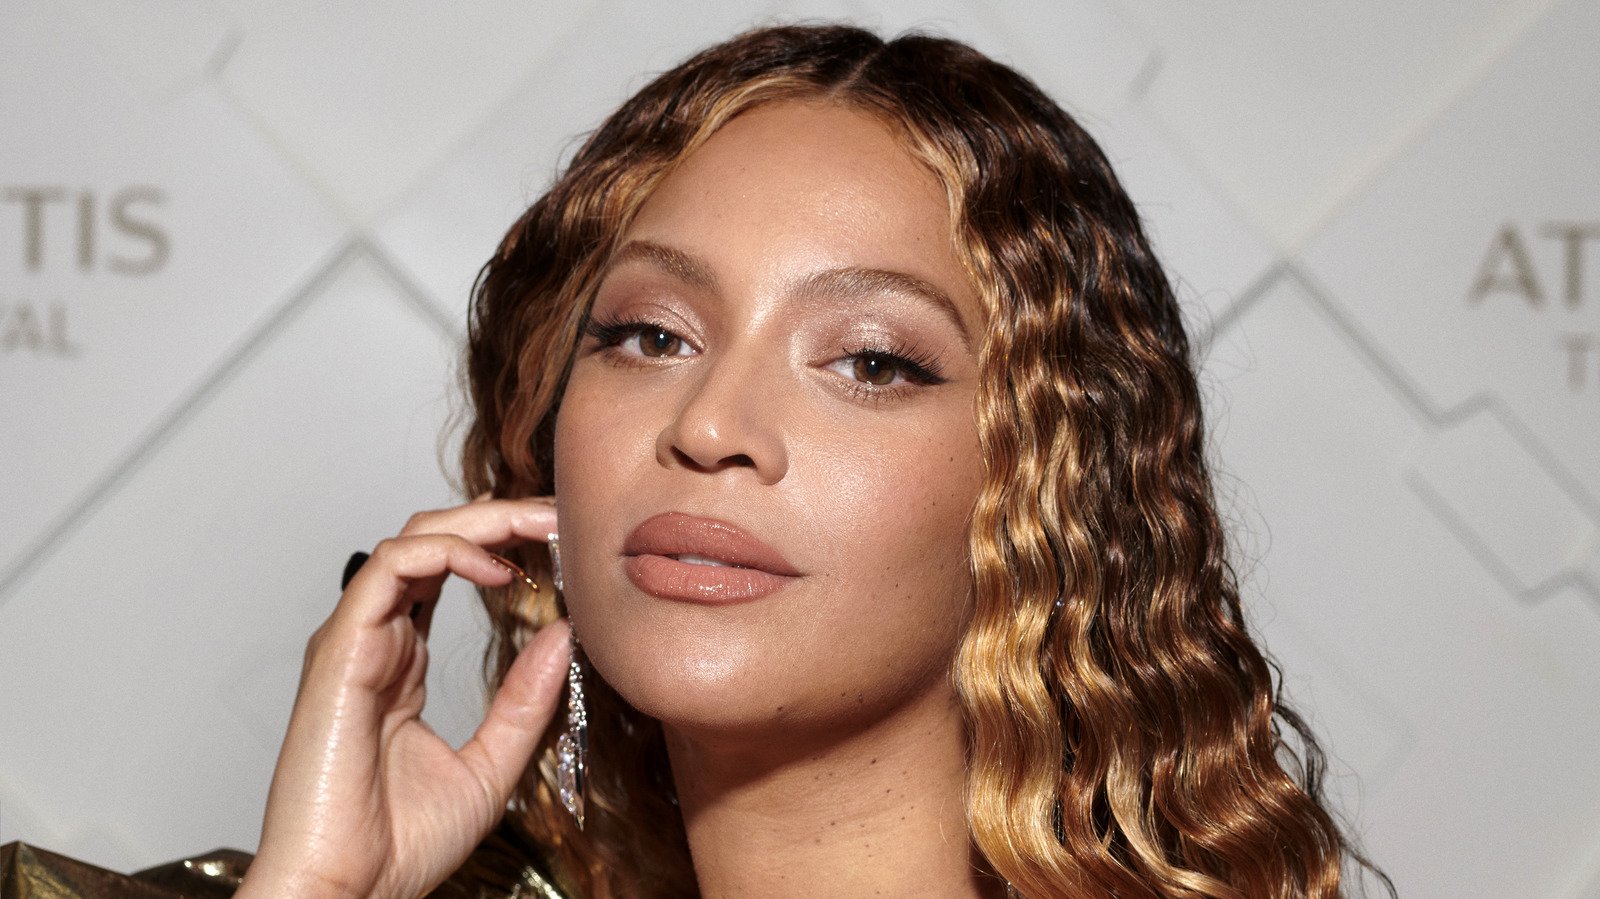 The Beyoncé-Approved Eyeliner Tip For The Boldest Cat-Eye Look - Glam